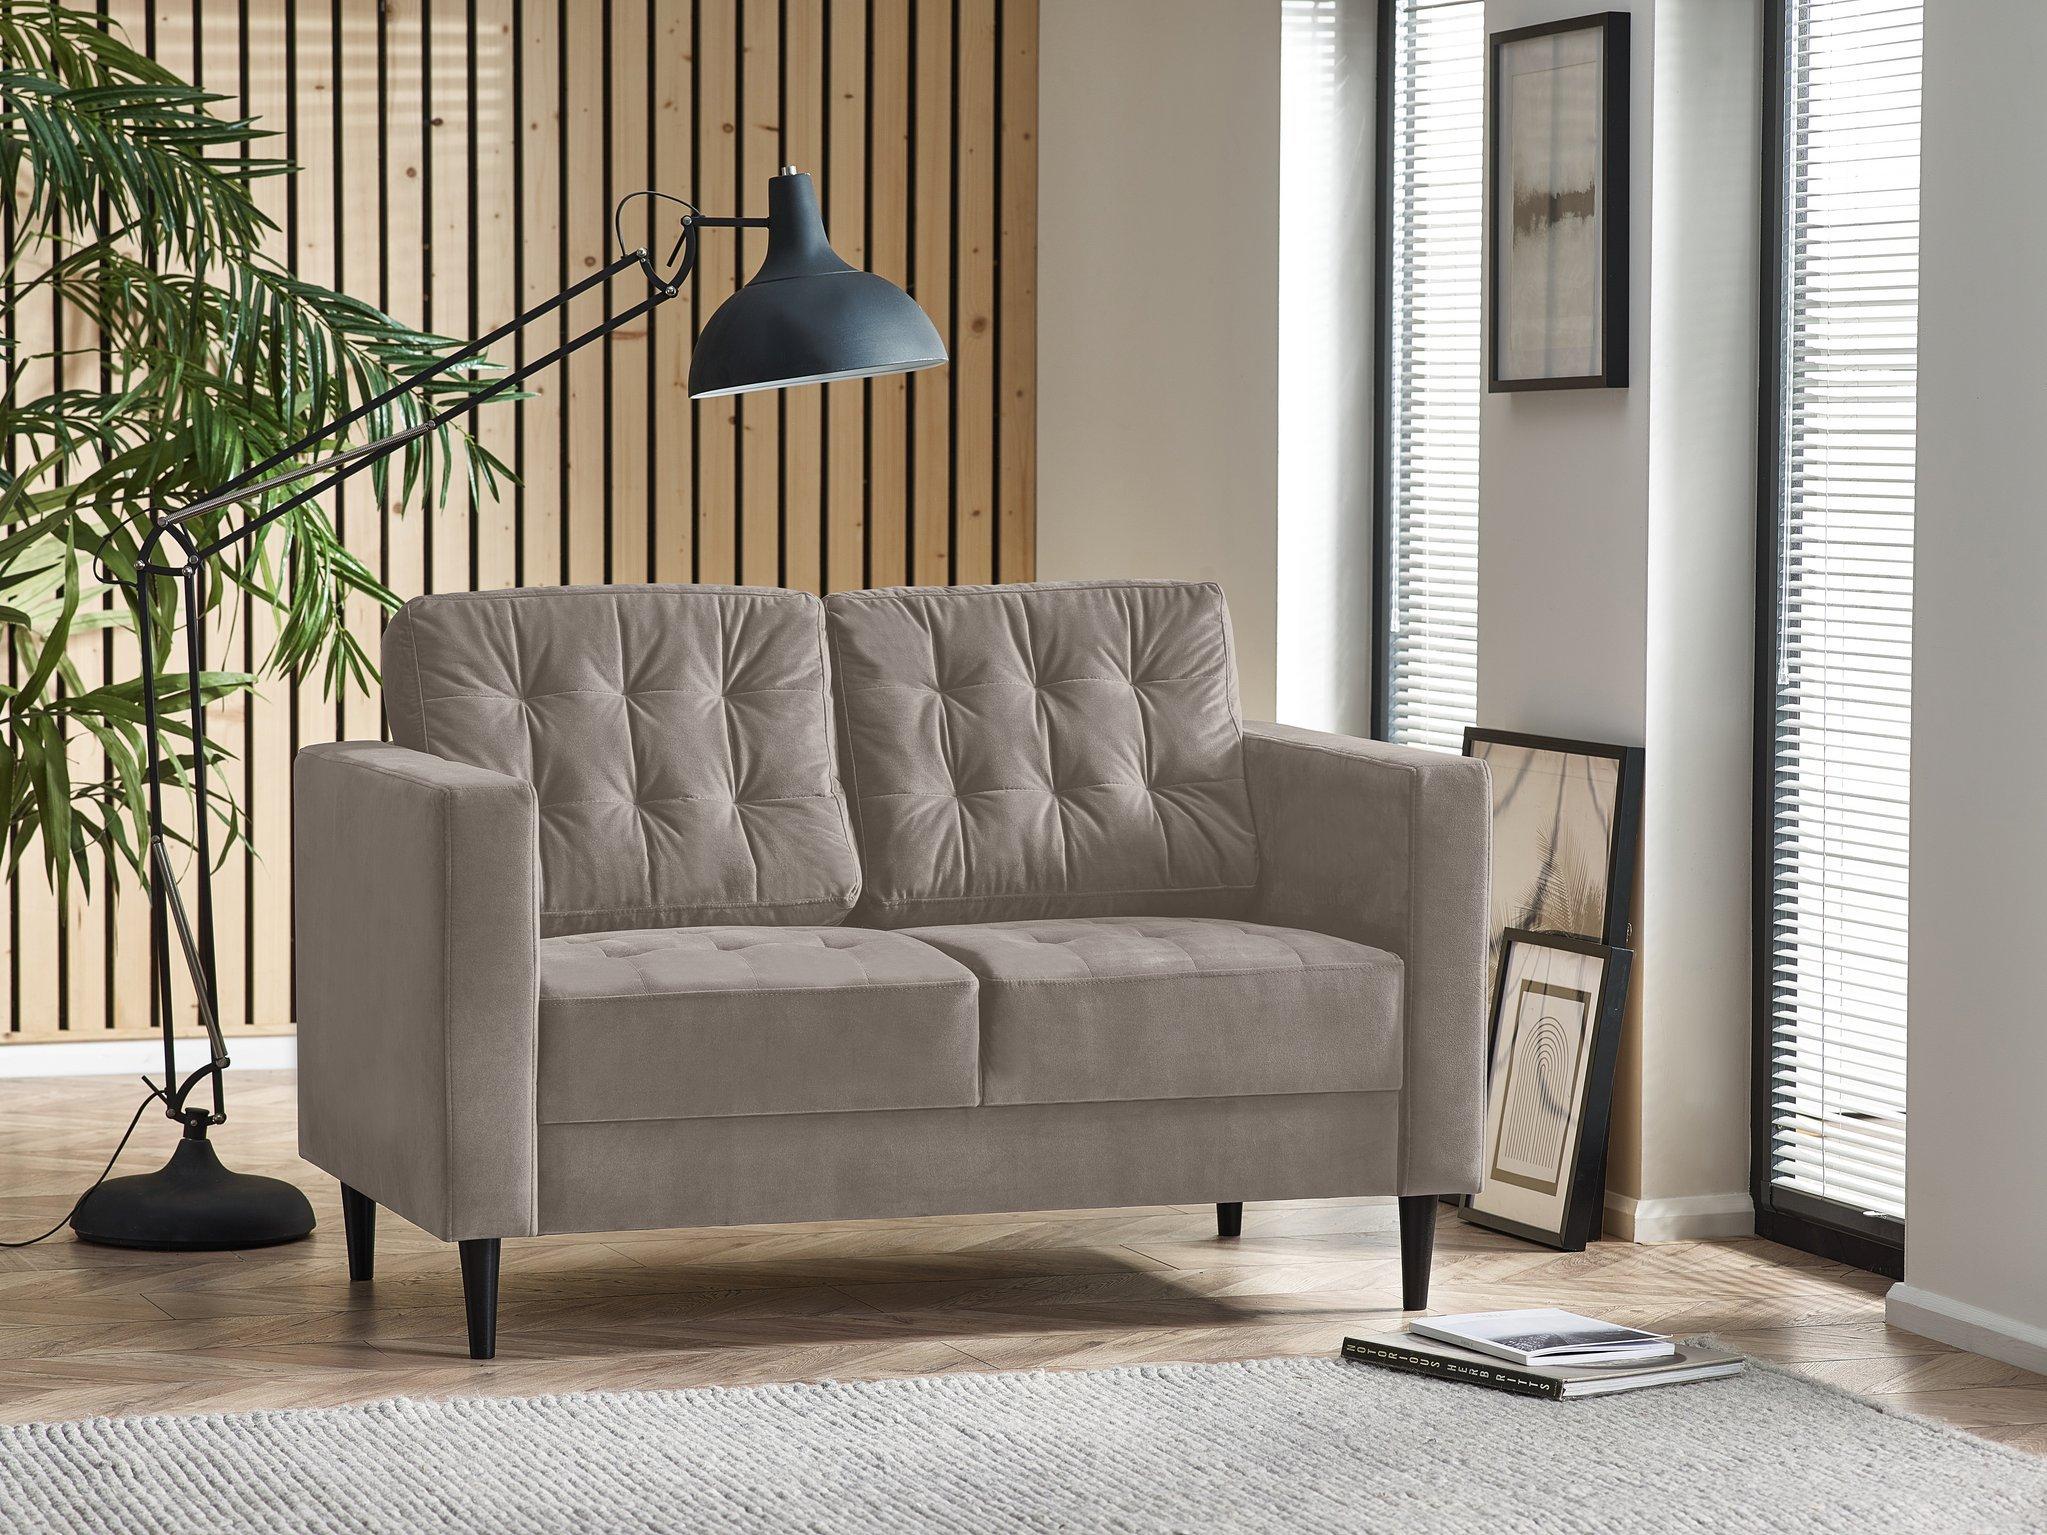 Jade 2-Seater Soft Touch Velvet Sofa With Solid Wood Frame